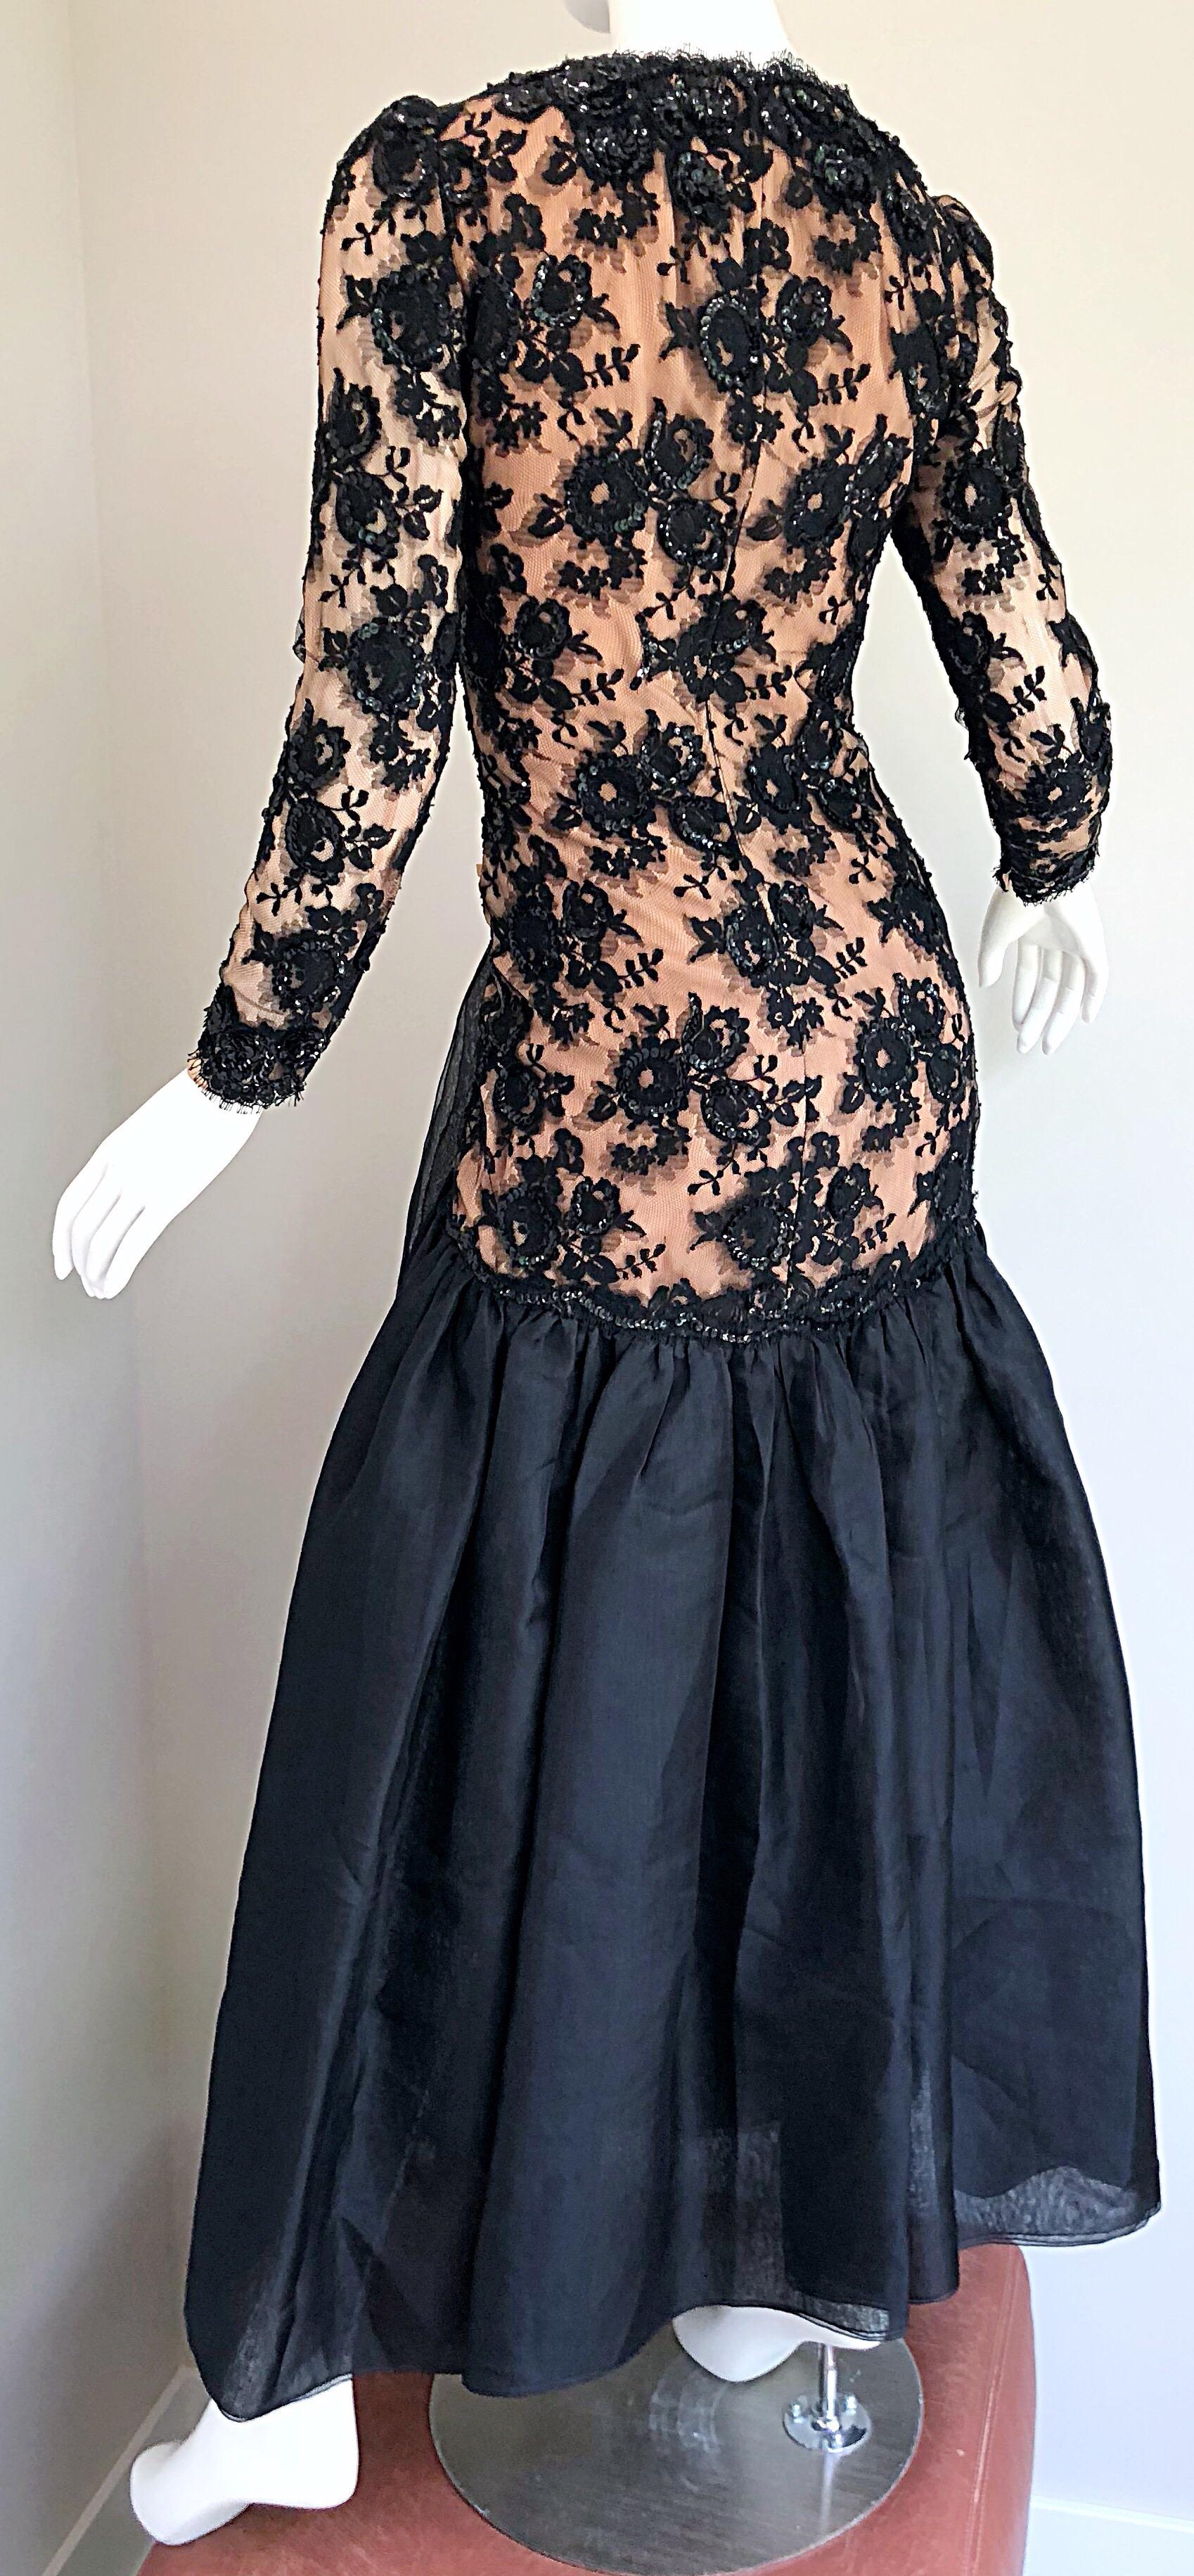 Vintage Bill Blass Black Nude 90s Size 6 / 8 Sequined Chiffon Evening Gown Dress For Sale 3